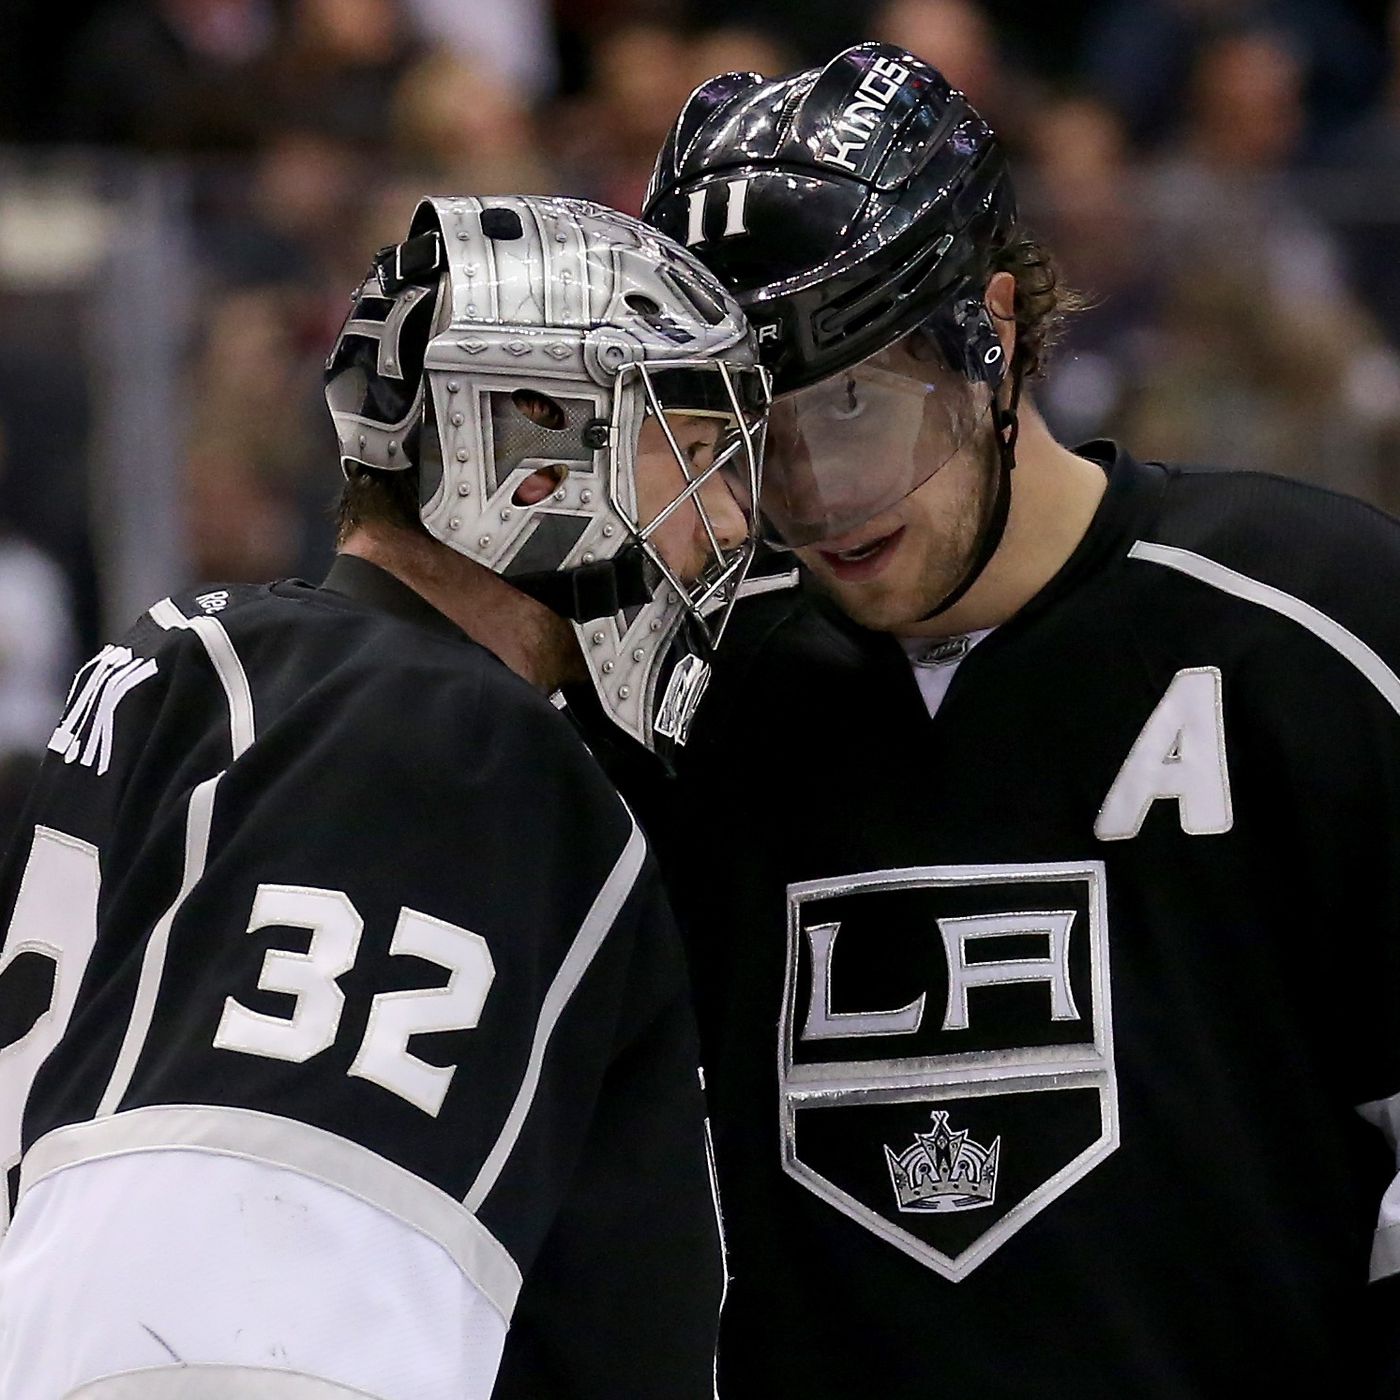 Anze Kopitar Week The Greatness Of According To Everyone